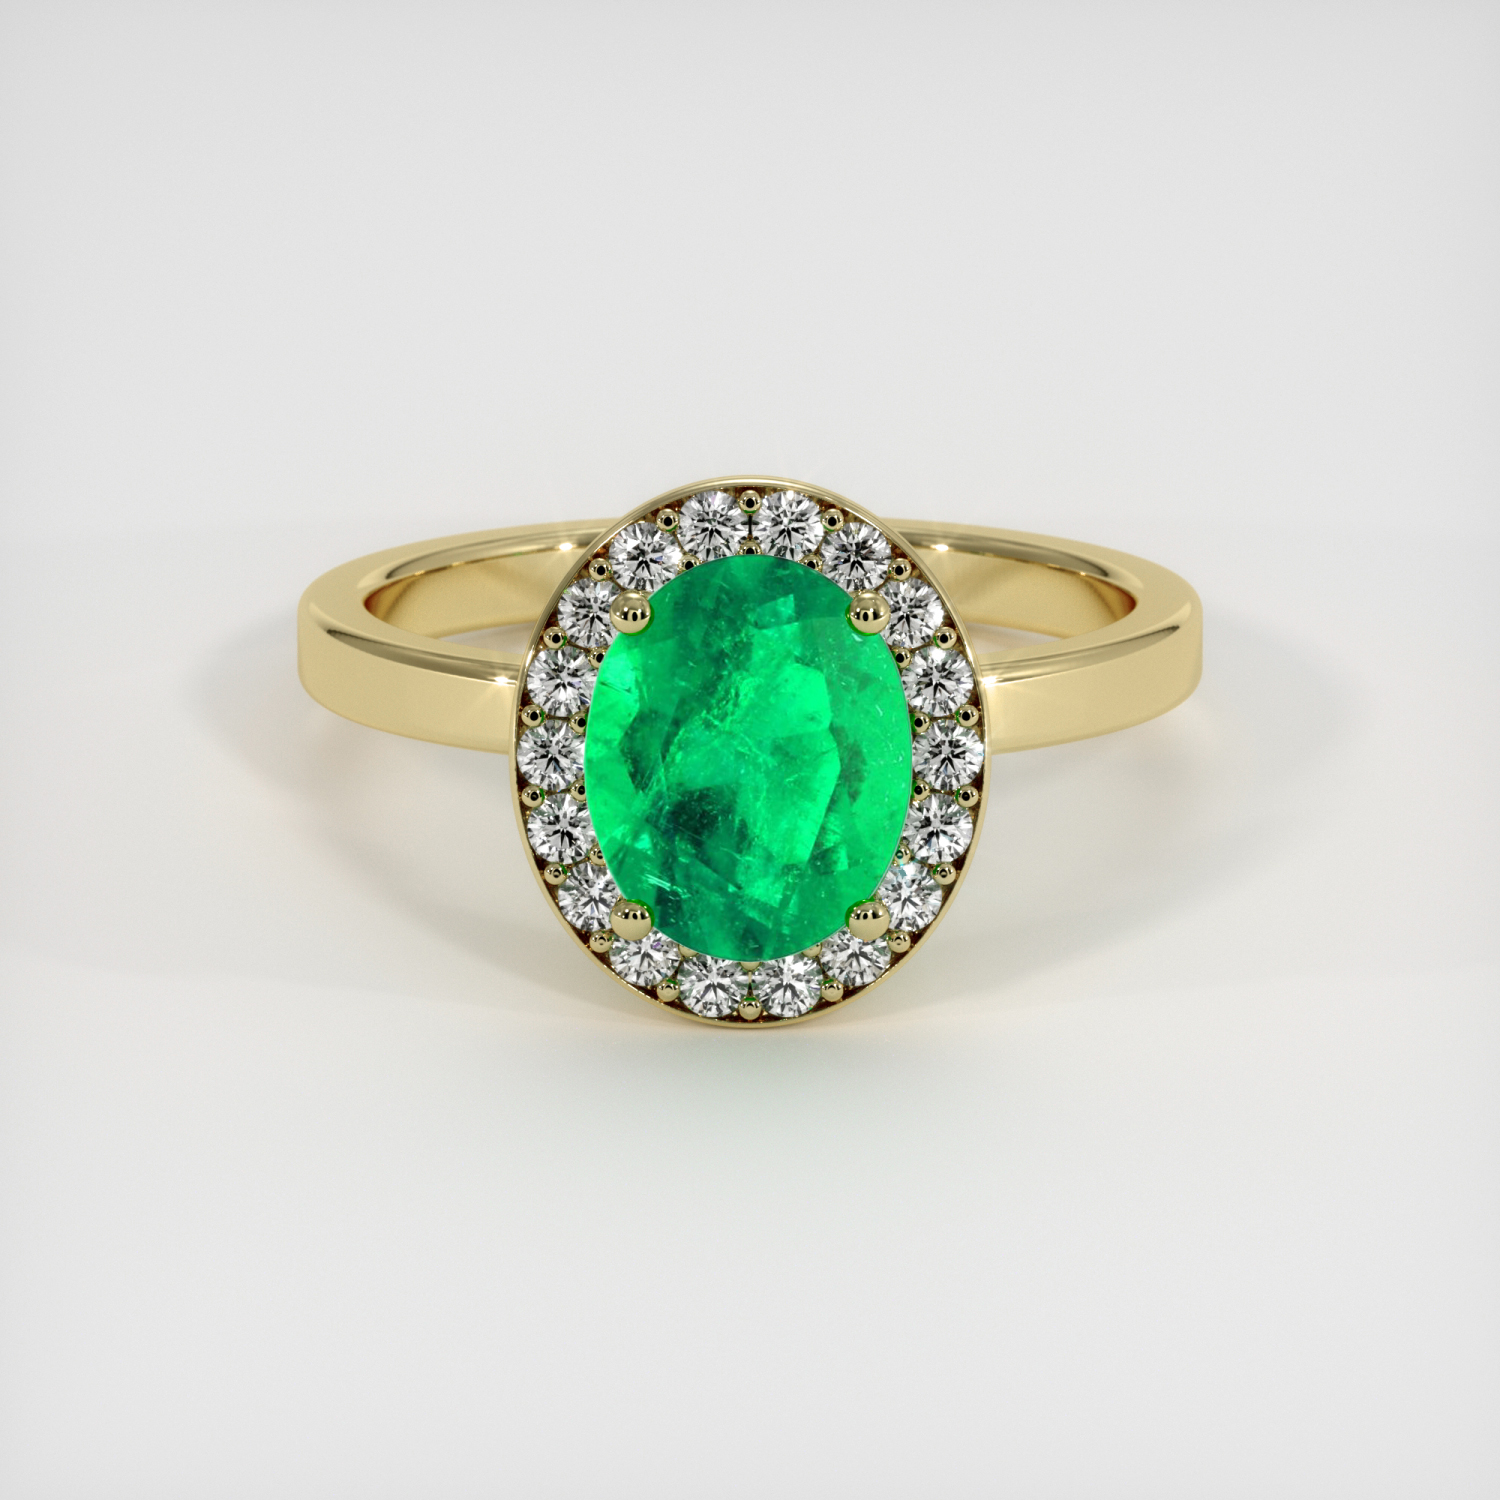 Emerald Ring 1.38 Ct. 18K Yellow Gold | The Natural Emerald Company